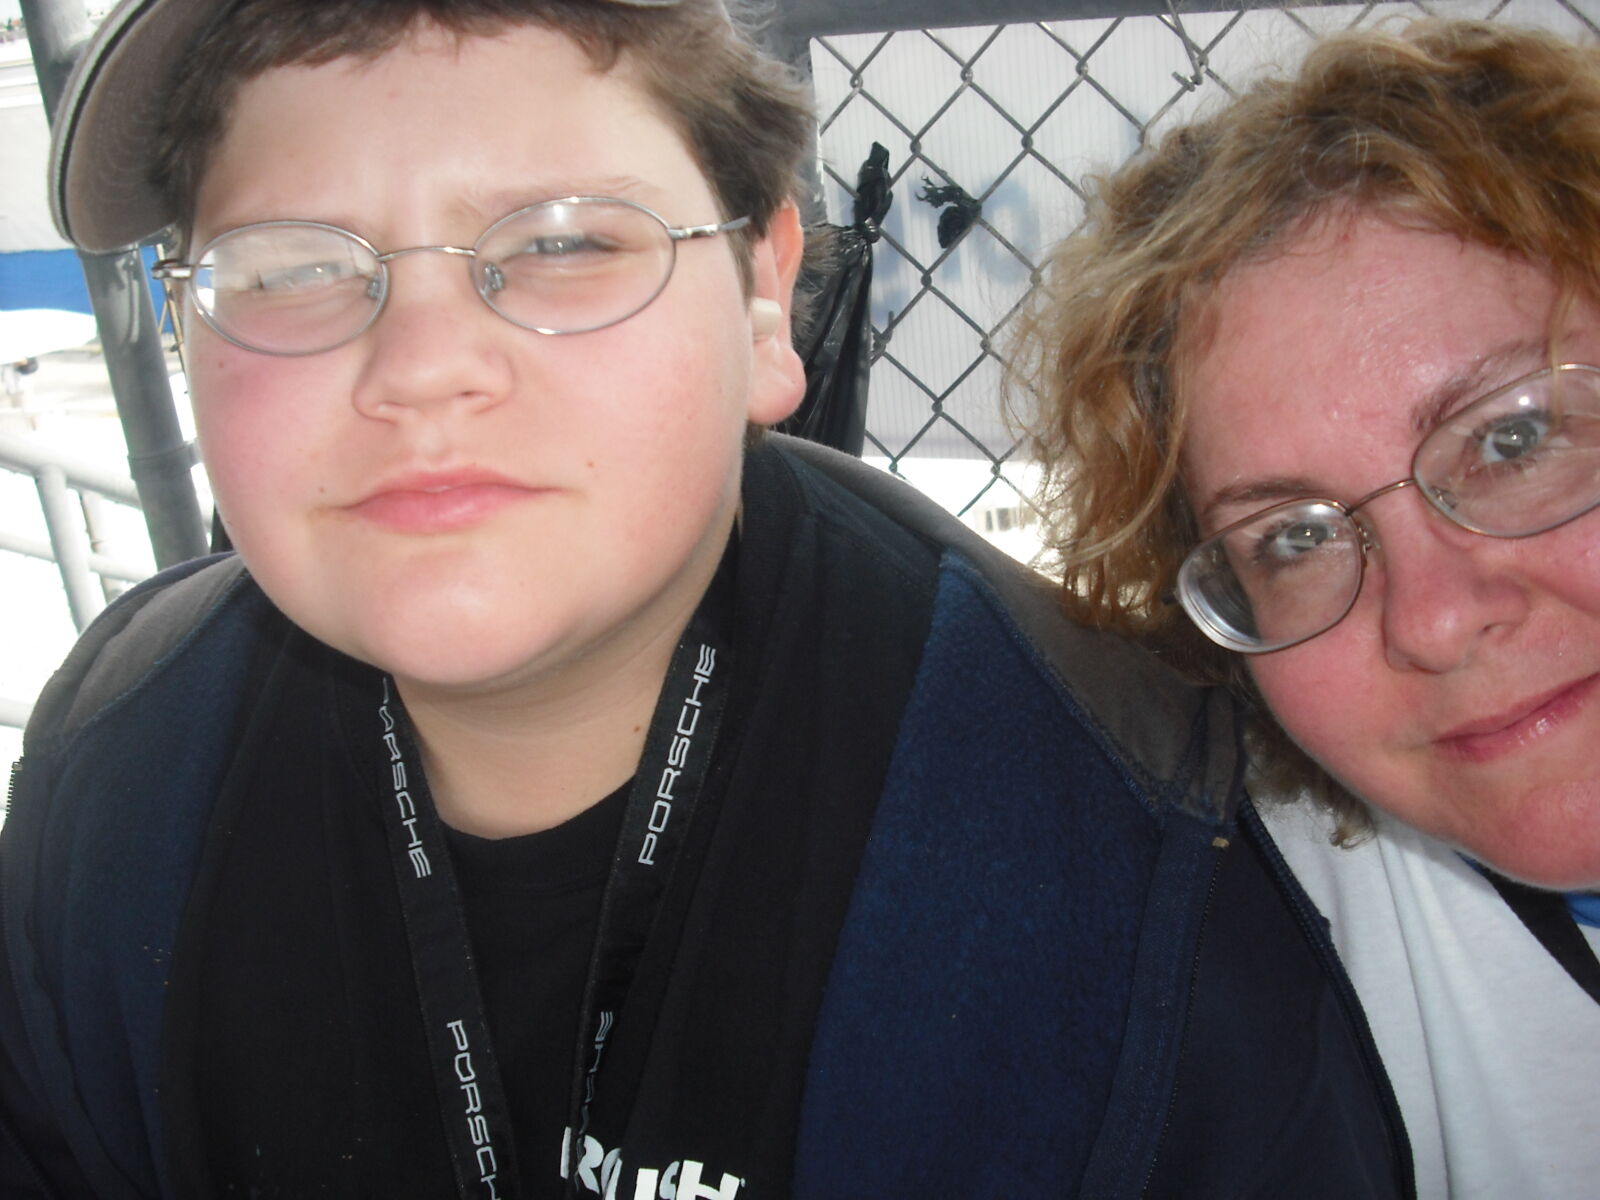 A young boy and a woman, both wearing glasses, smile at the camera while standing near a chain-link fence.